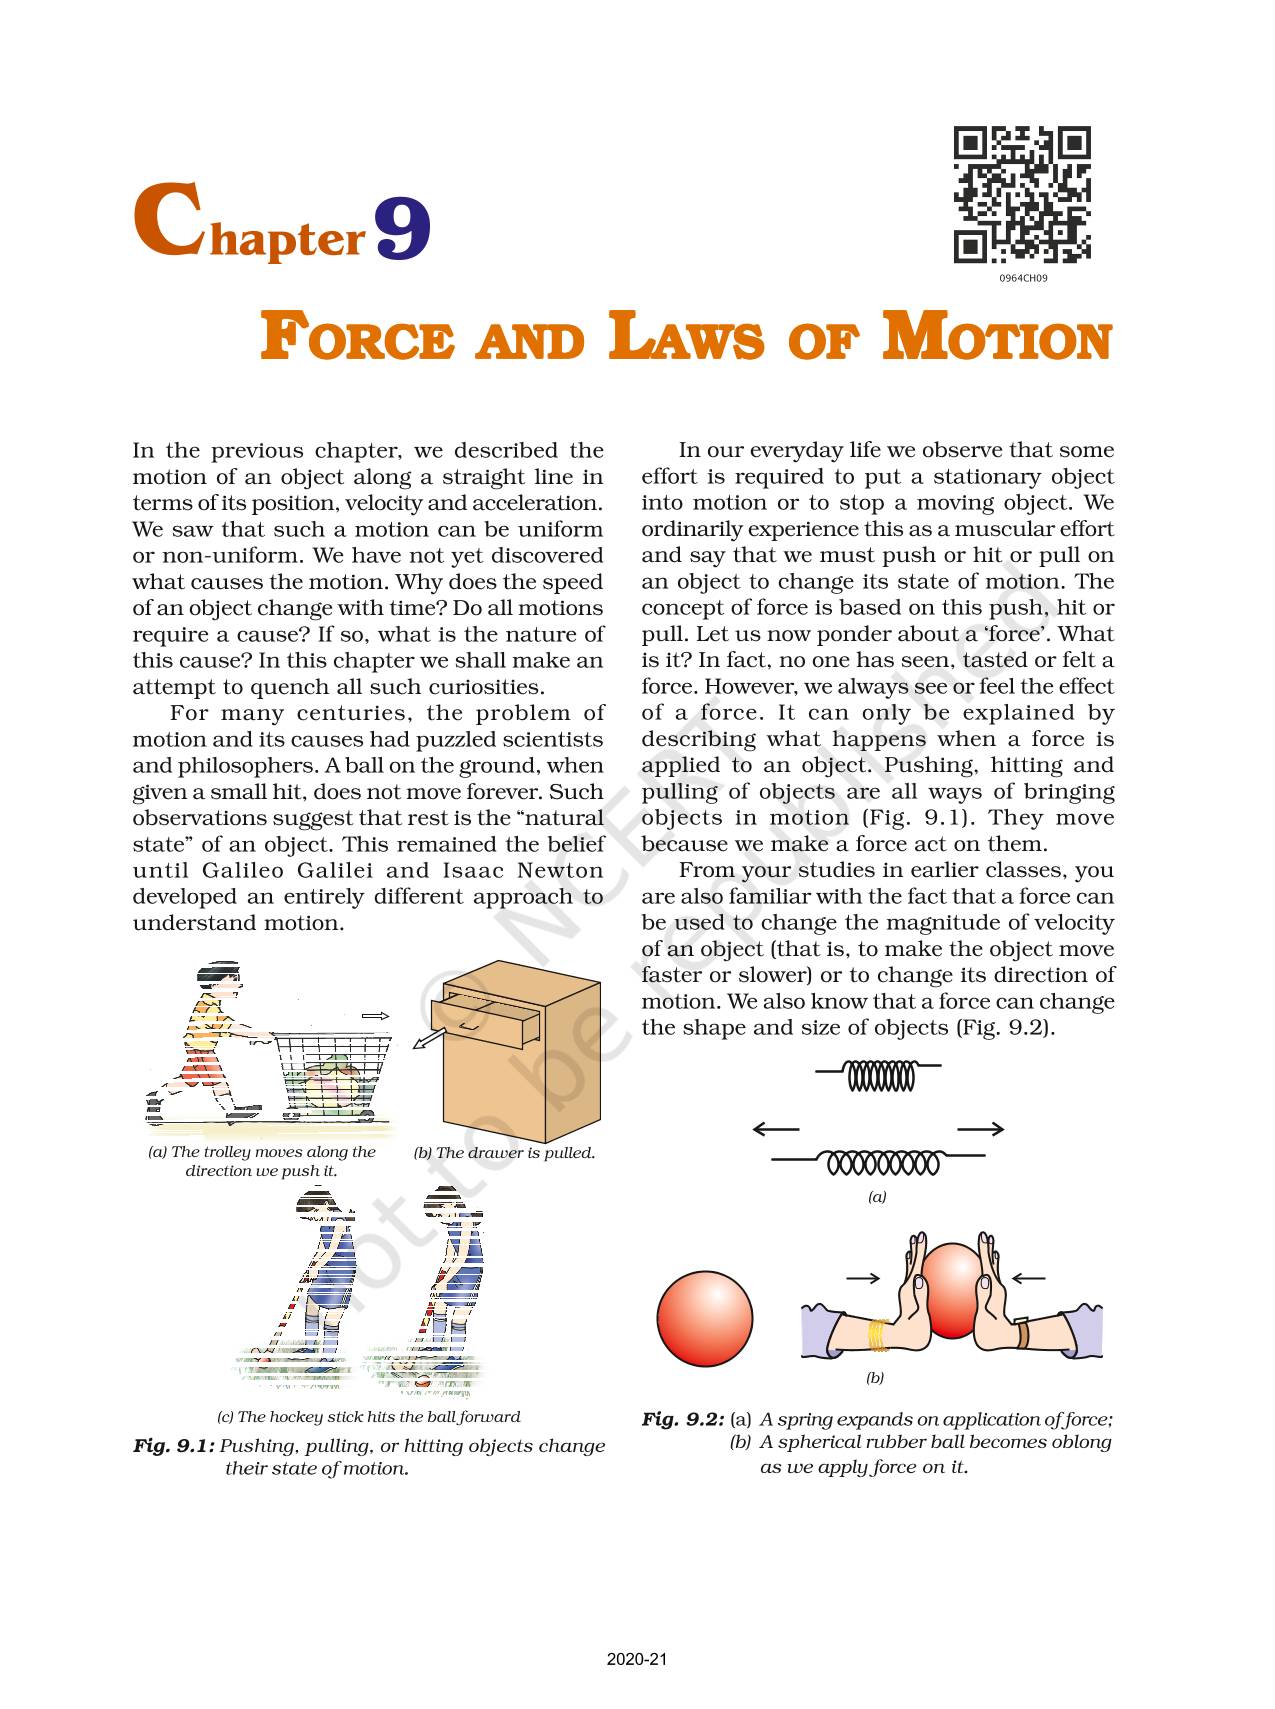 case study questions force and laws of motion